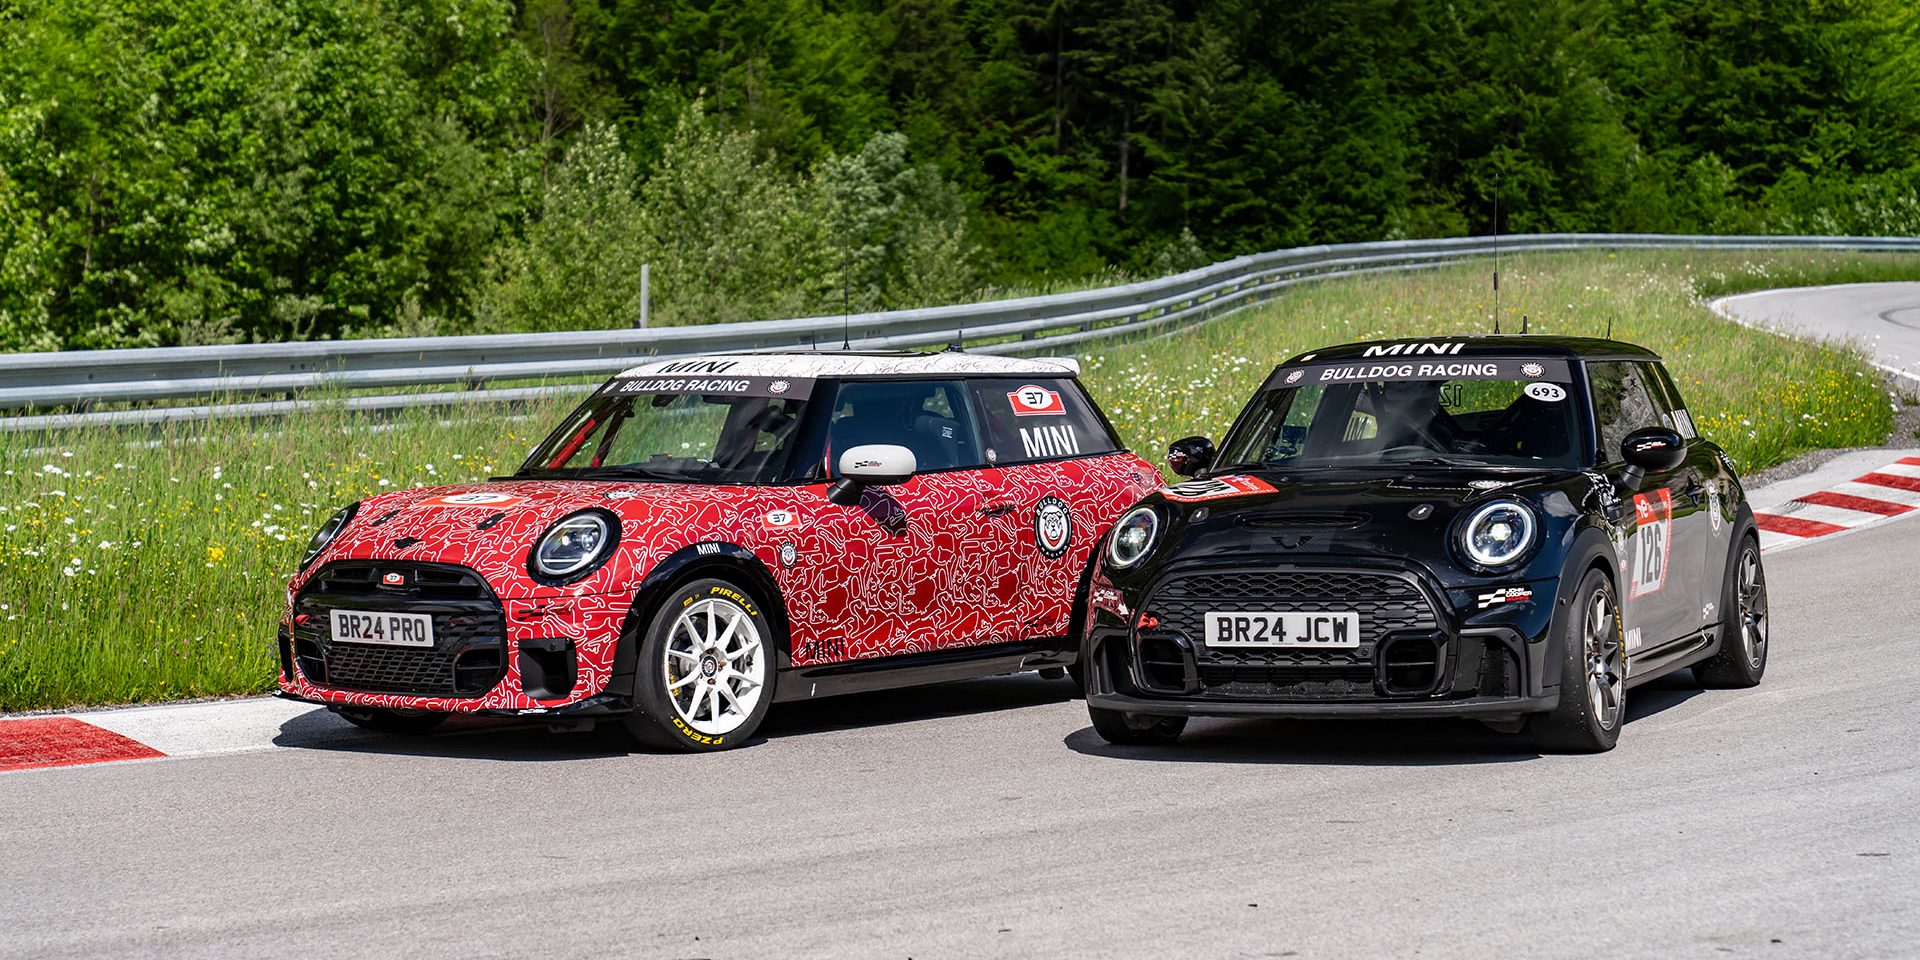 MINI John Cooper Works and Bulldog Racing Rev Up for Intense Competition at the 24 Hours Nürburgring